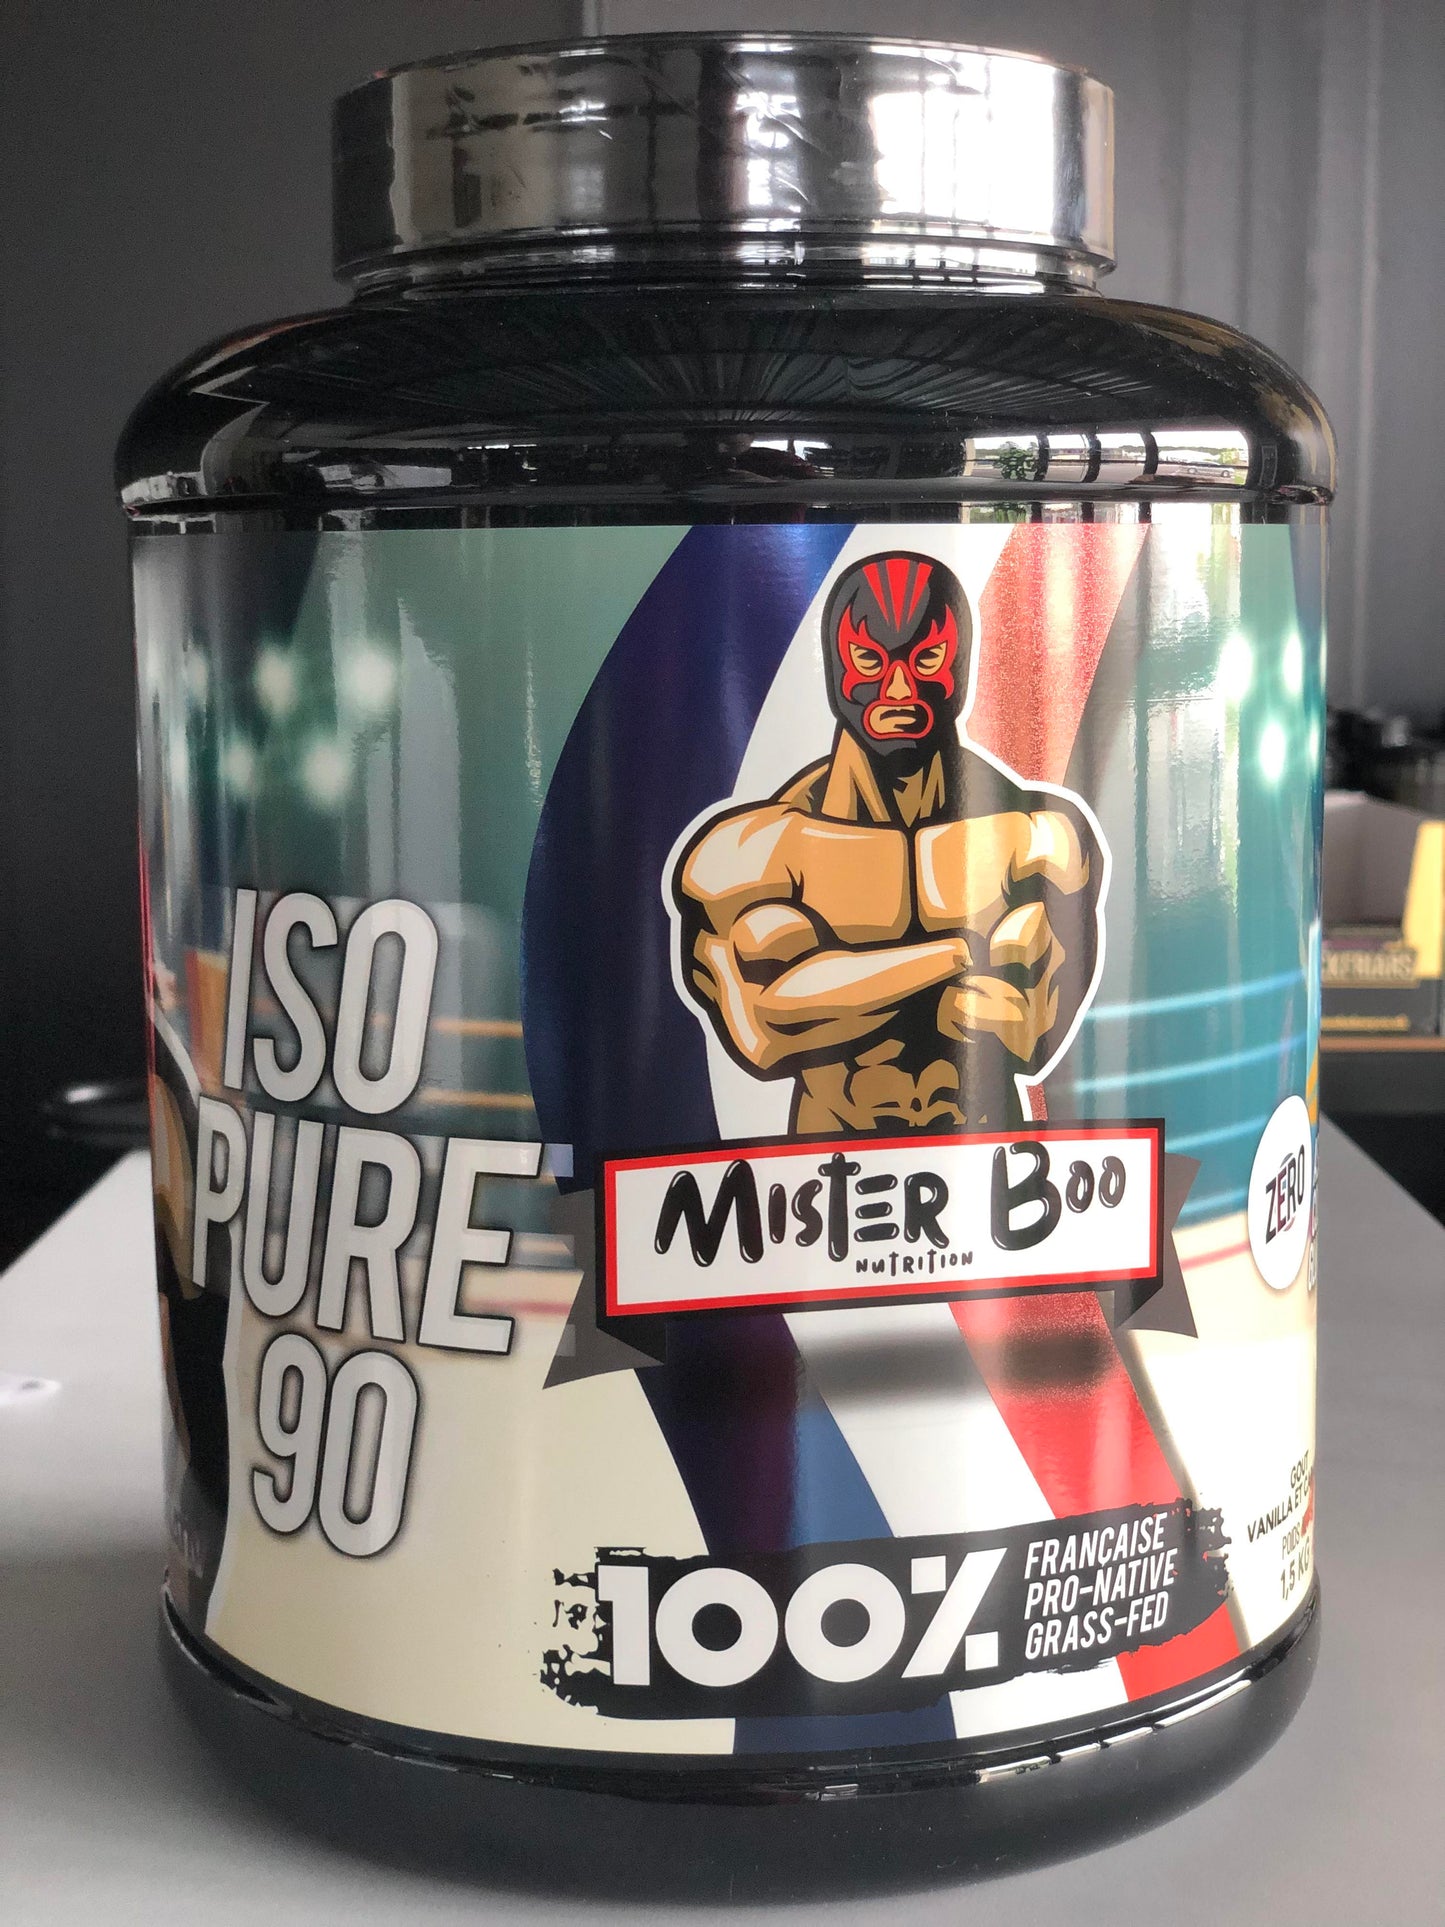 ISO PURE 90 BY MISTER BOO 1.5KG 100% NATIVE 100% FRANCAISE LABELISE